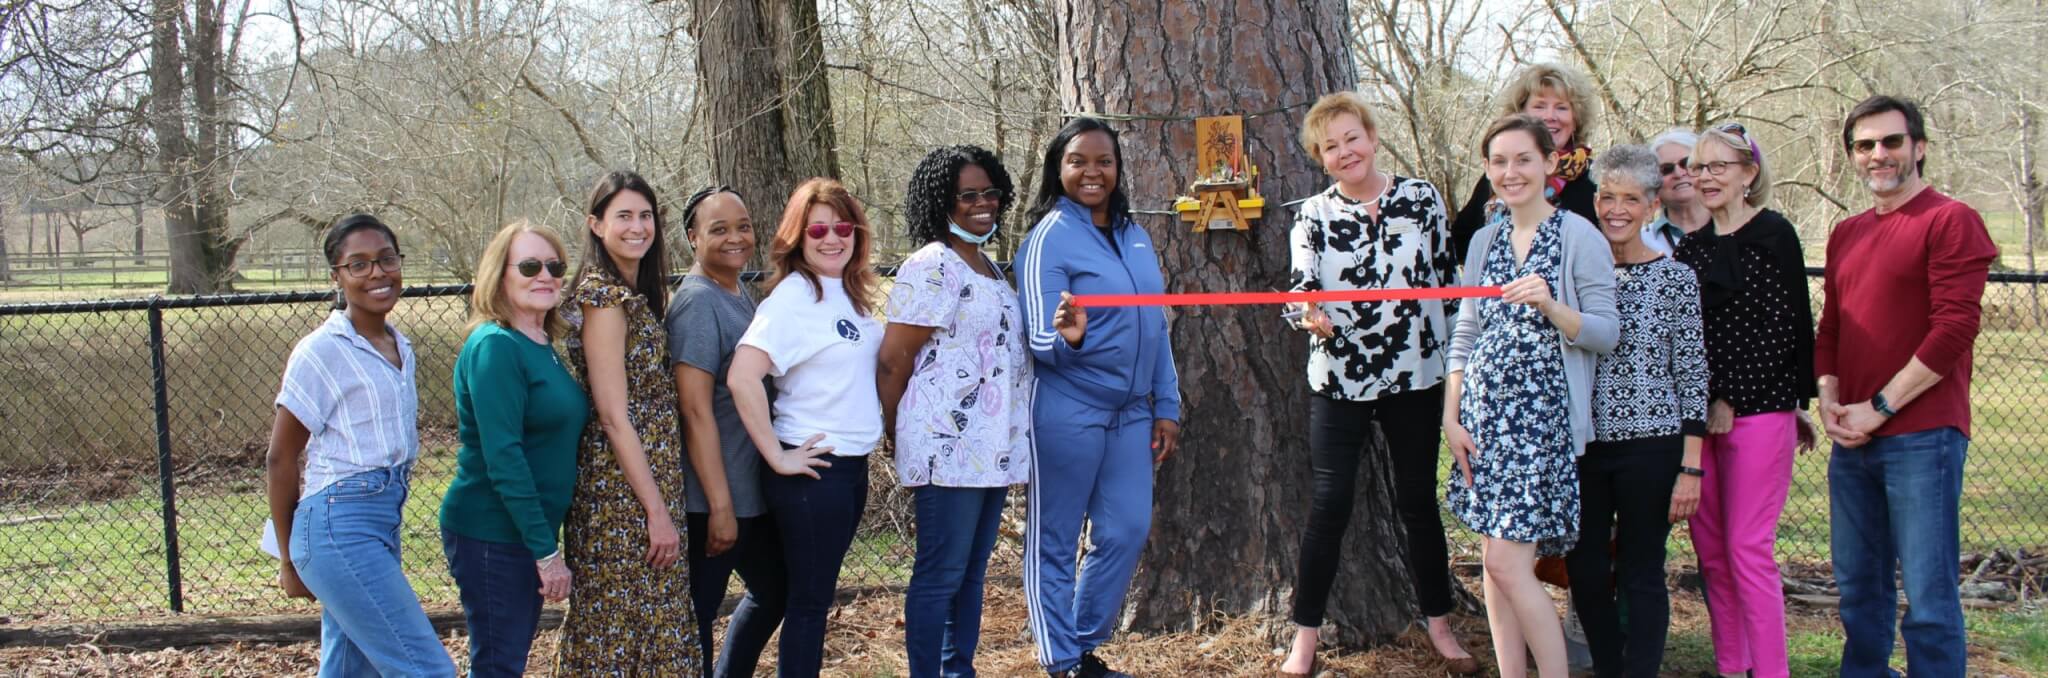 Group photo of ribbon cutting in front of small picnic table mounted to tree